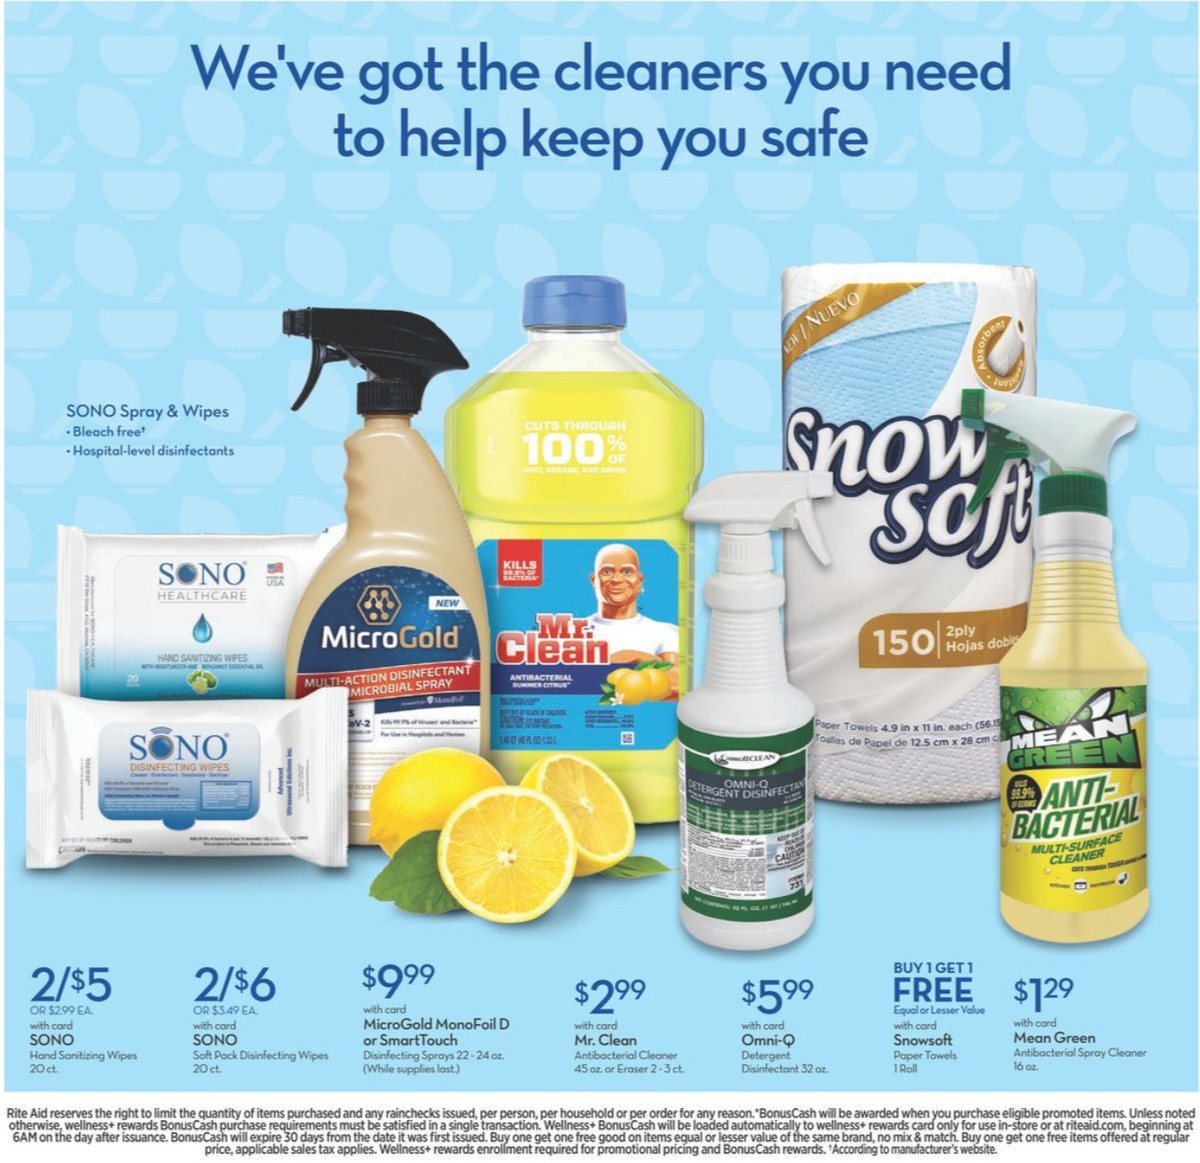 Rite Aid Weekly Ad from January 17